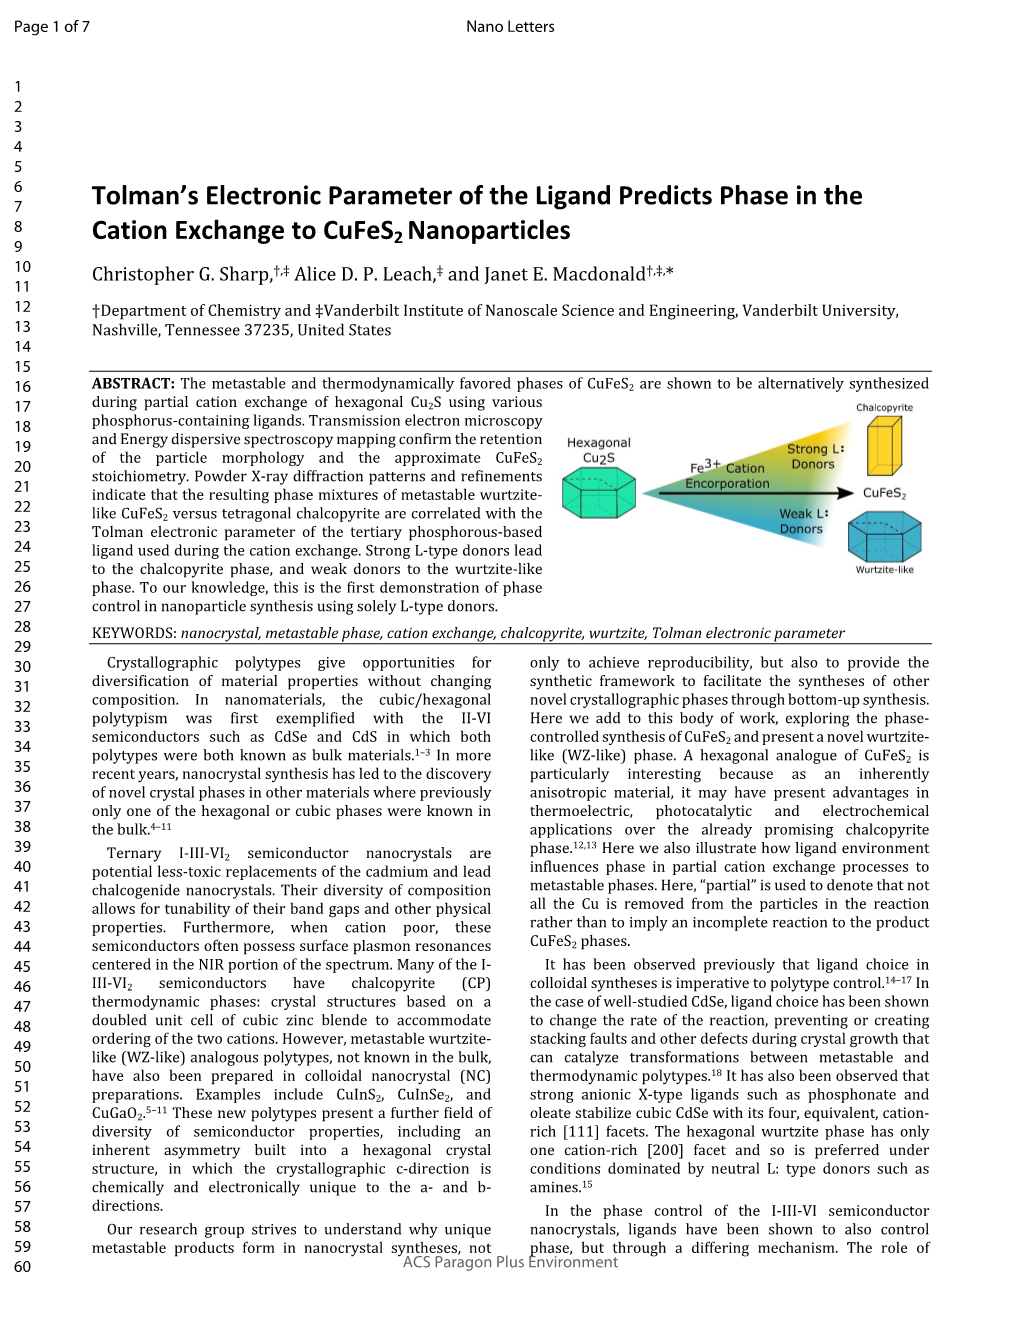 Tolman's Electronic Parameter of the Ligand Predicts Phase in the Cation